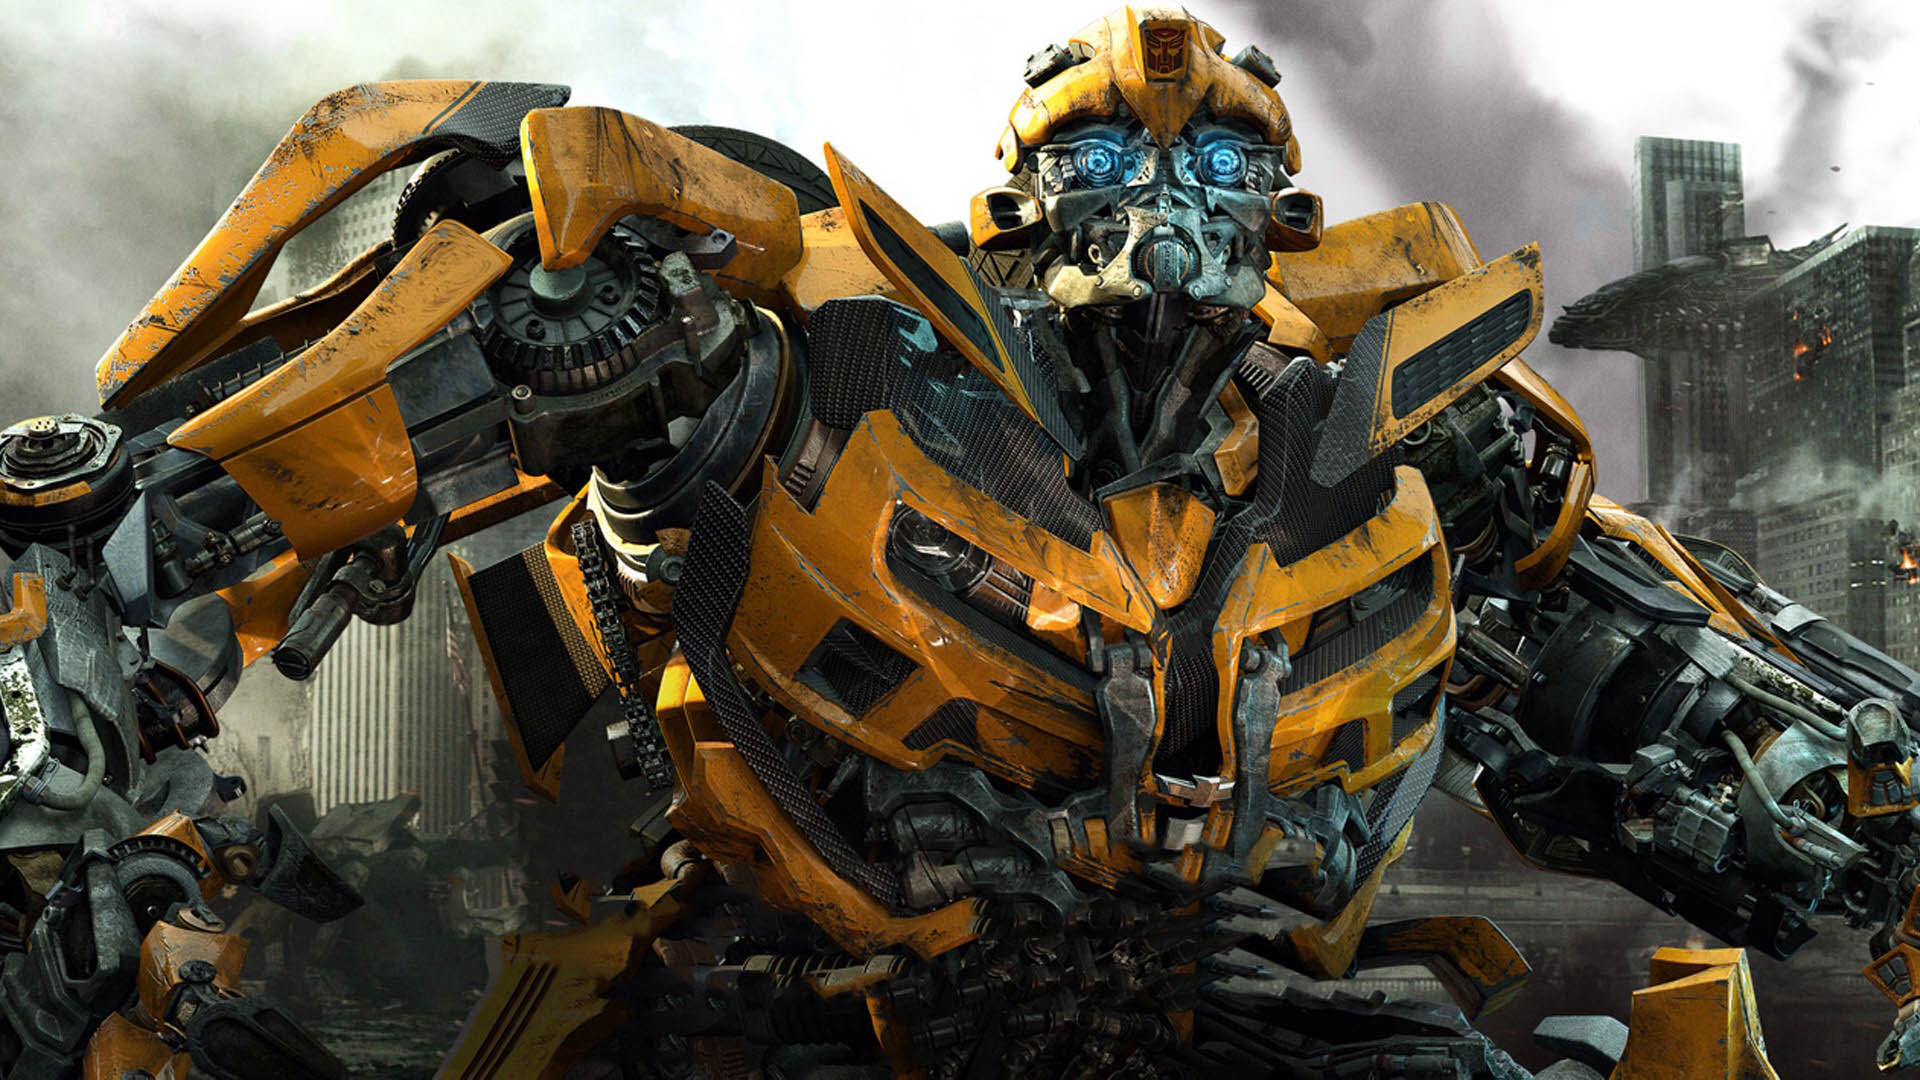 Transformers: Age Of Extinction - Bumblebee - 1920x1080 - Full HD ...